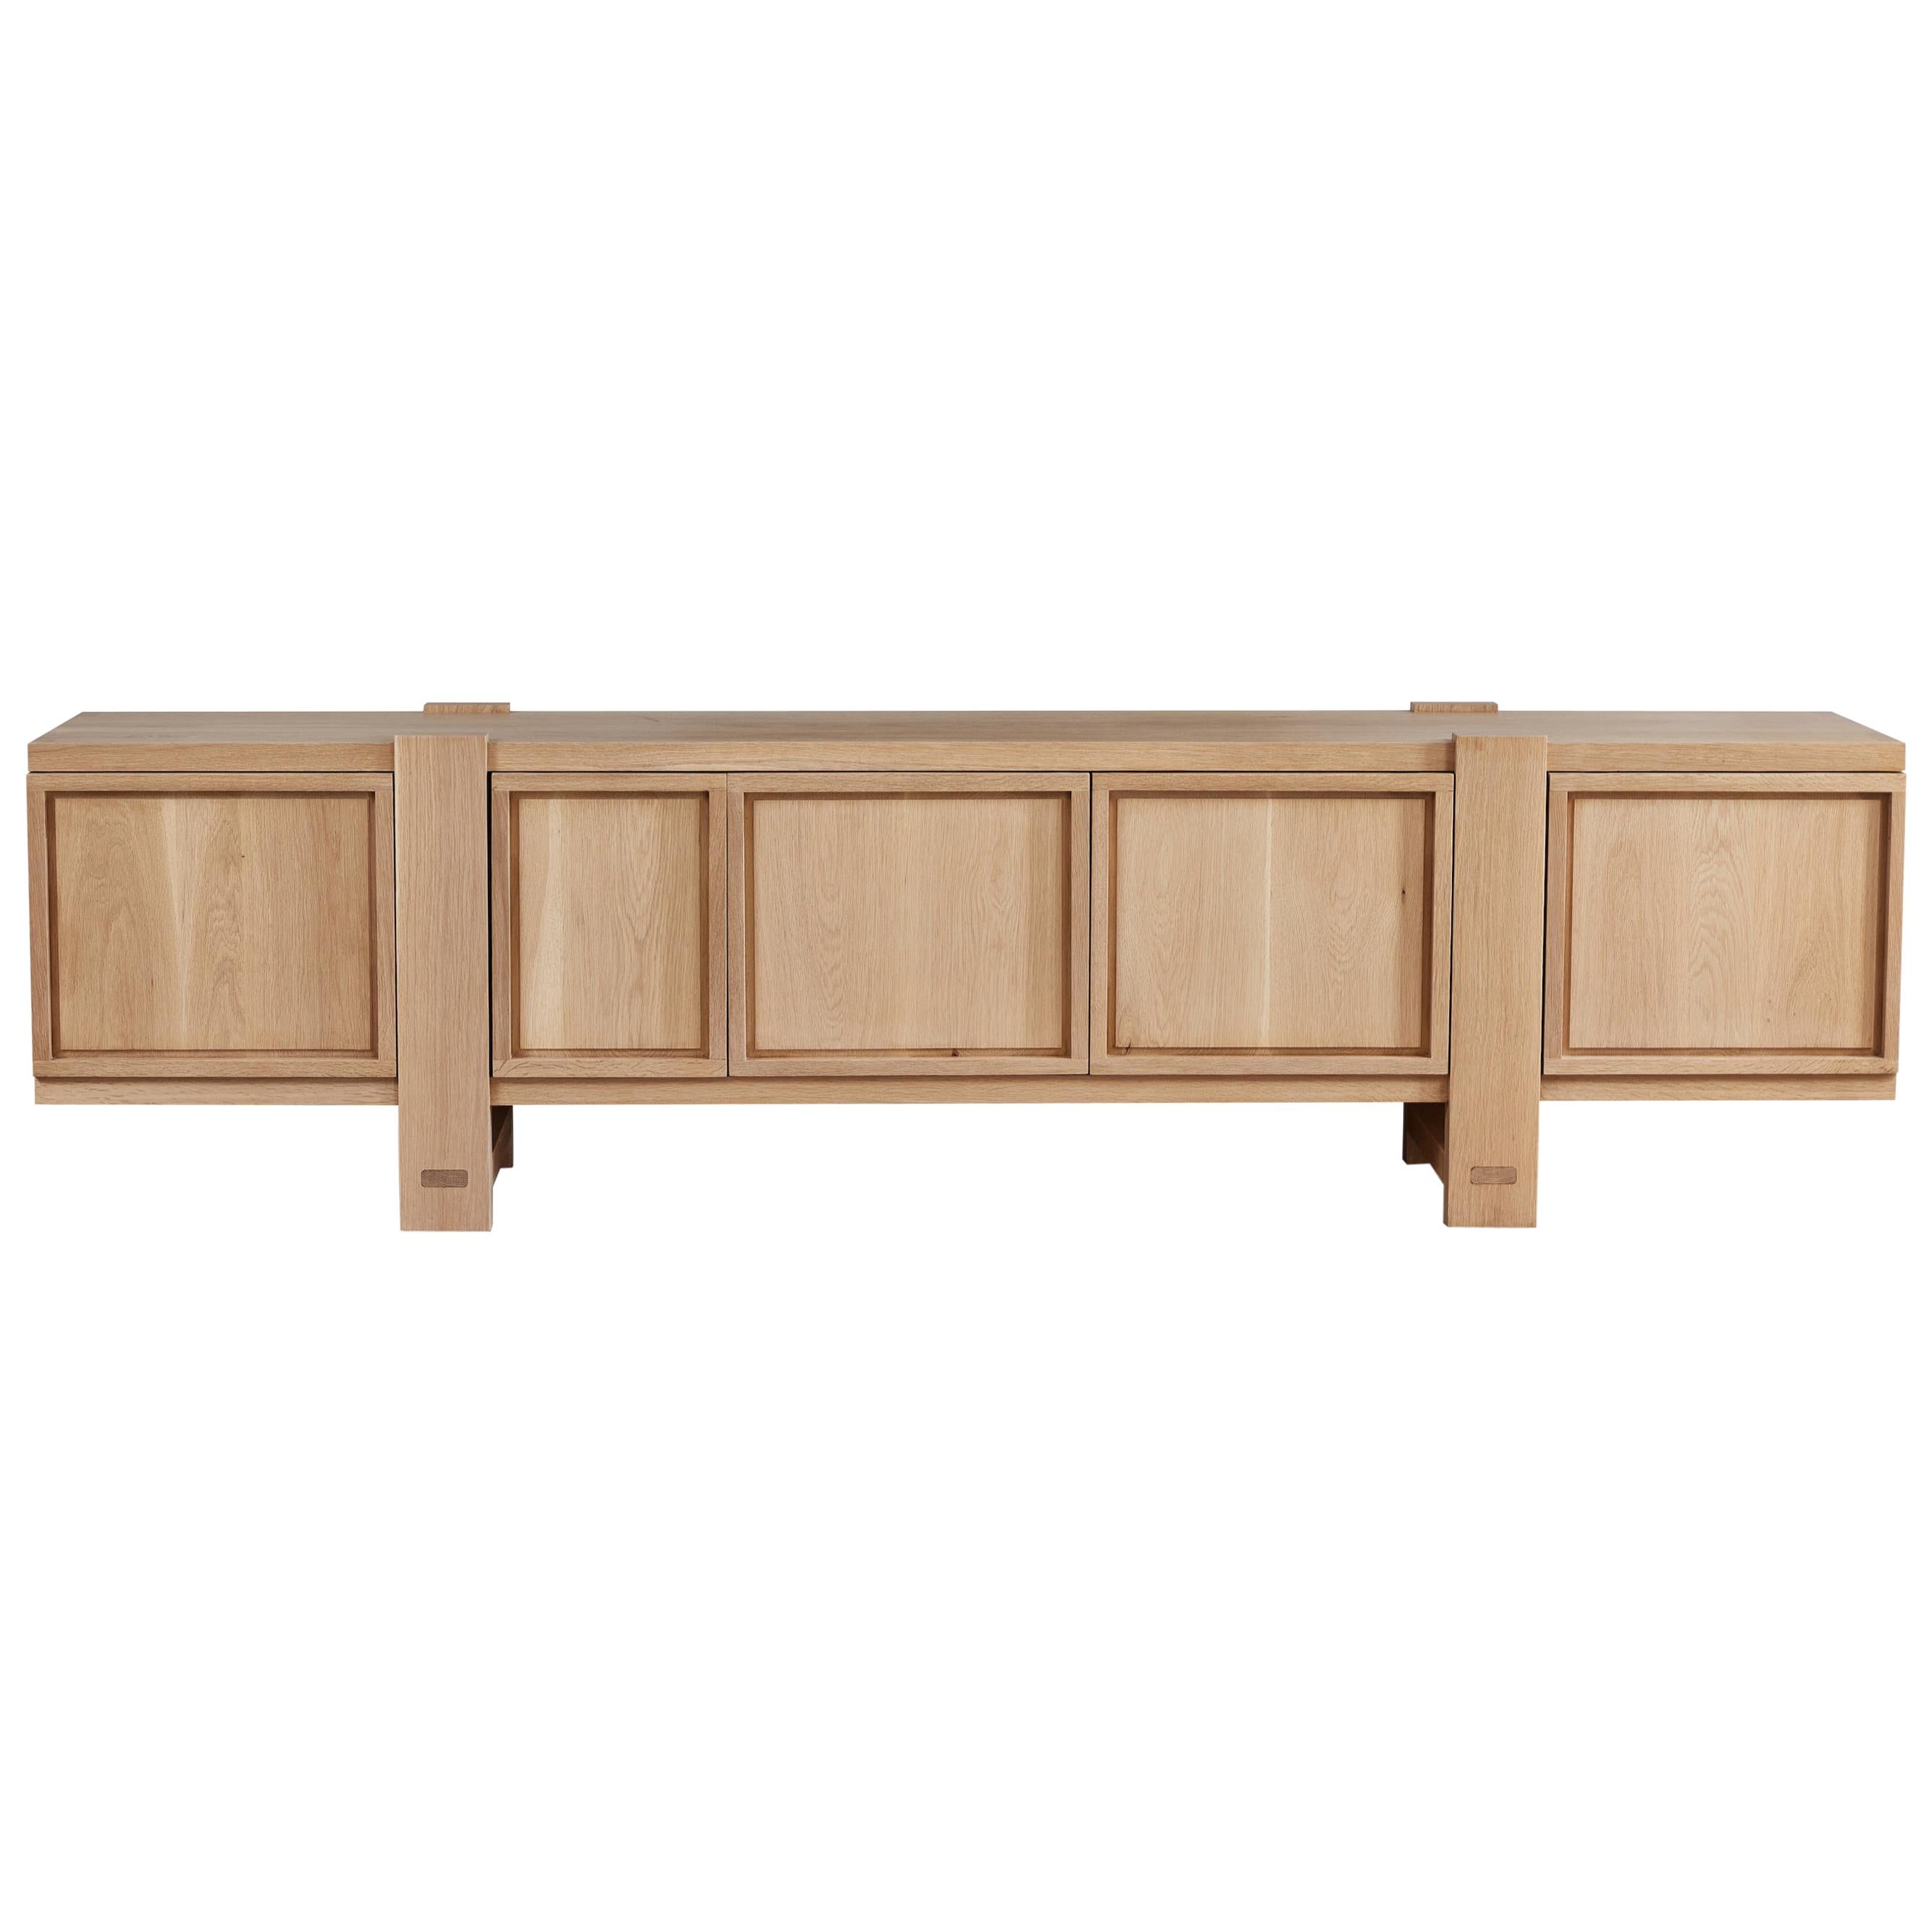 Lake Credenza, in White Oak, by August Abode